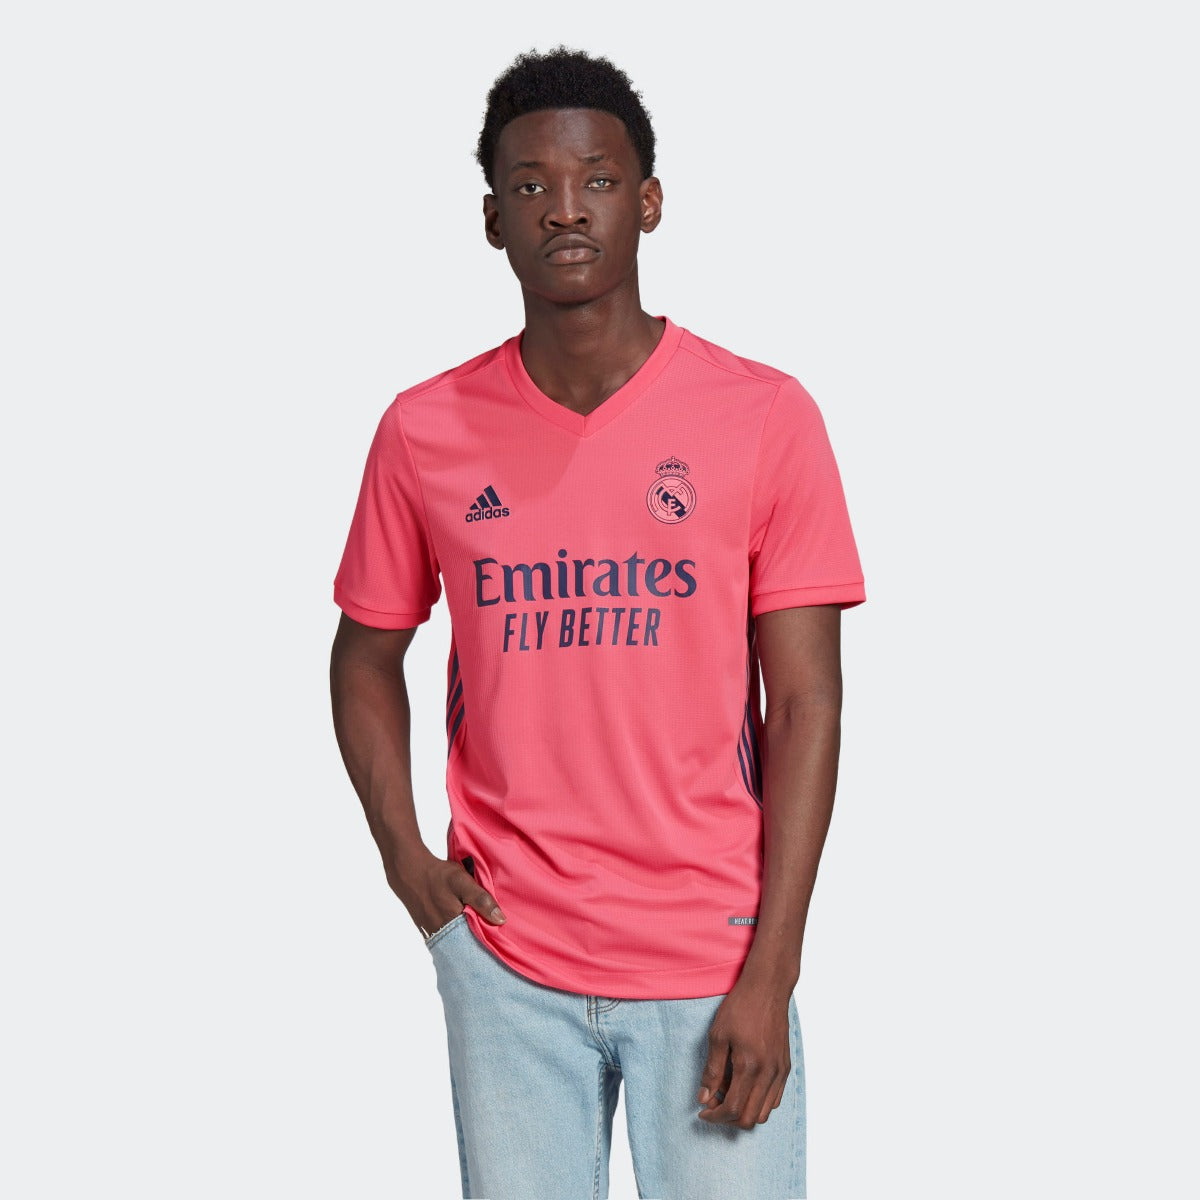 Why an All White Goalkeeper Kit, When you can get All Pink!